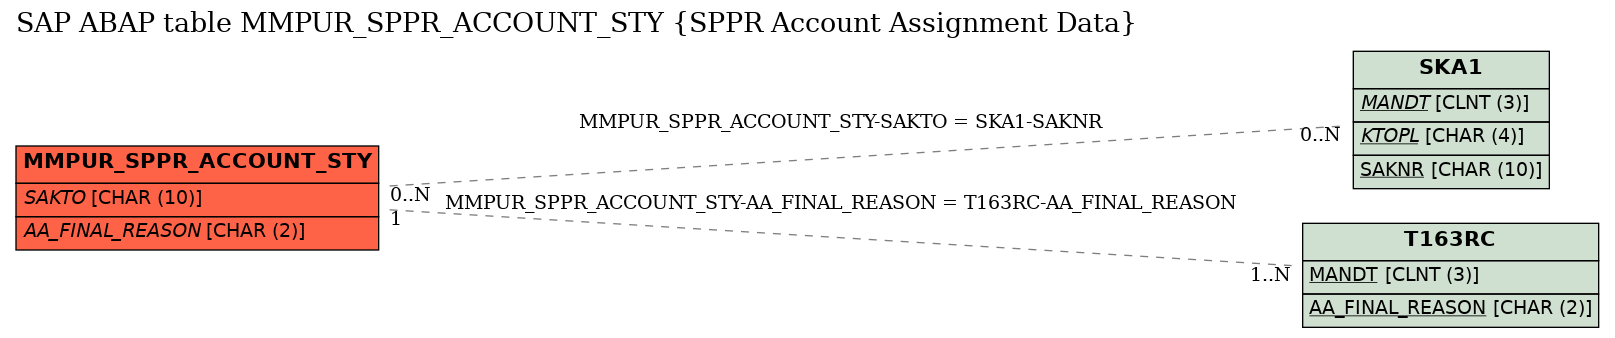 E-R Diagram for table MMPUR_SPPR_ACCOUNT_STY (SPPR Account Assignment Data)